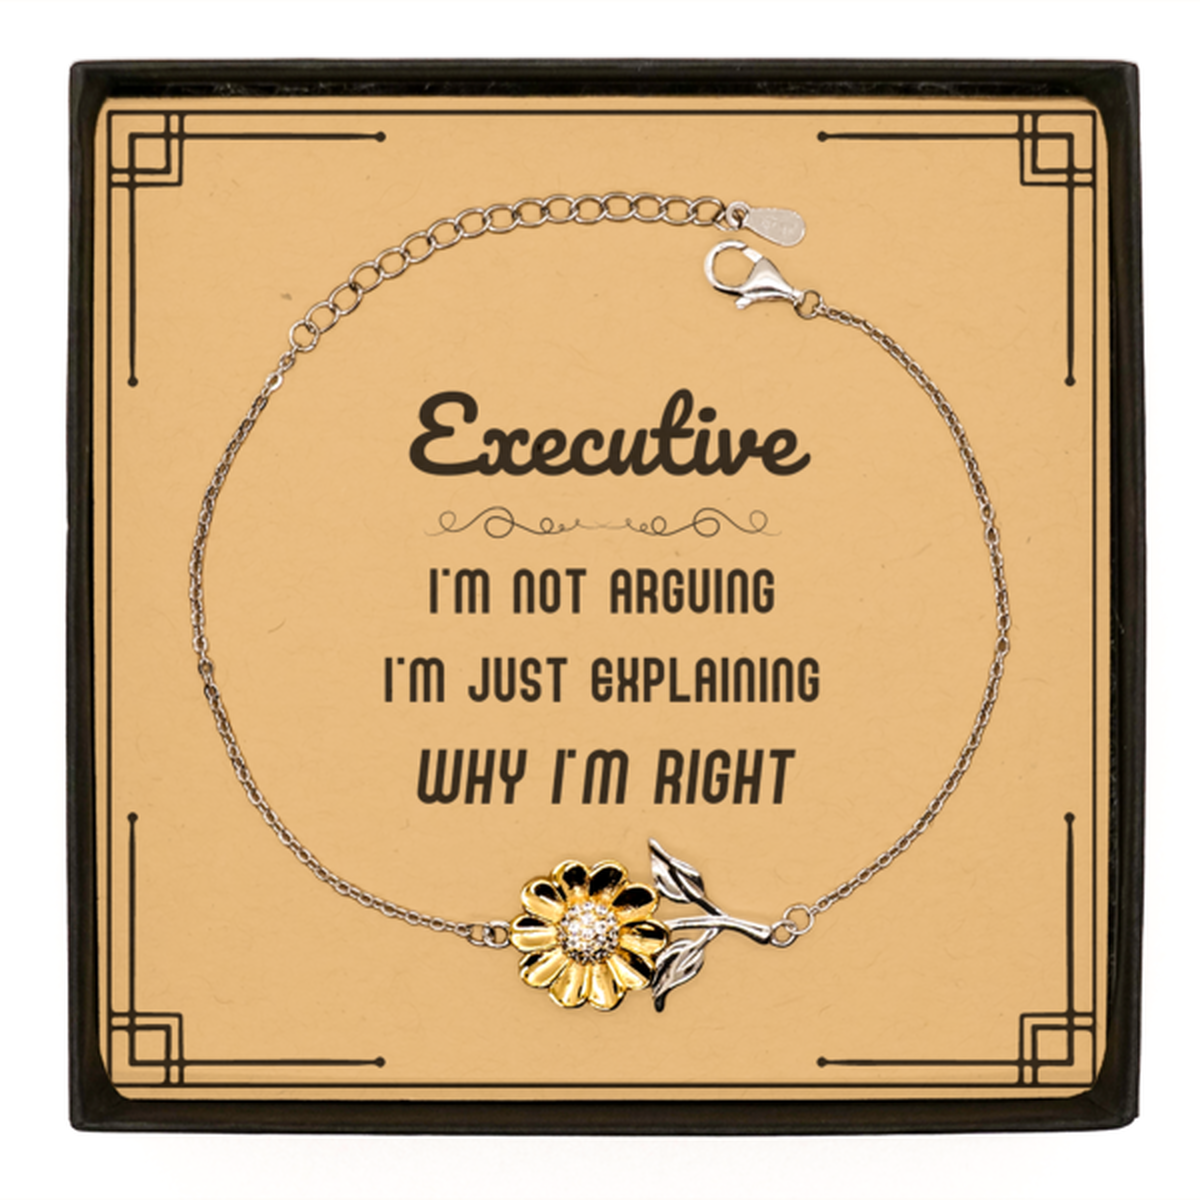 Executive I'm not Arguing. I'm Just Explaining Why I'm RIGHT Sunflower Bracelet, Funny Saying Quote Executive Gifts For Executive Message Card Graduation Birthday Christmas Gifts for Men Women Coworker